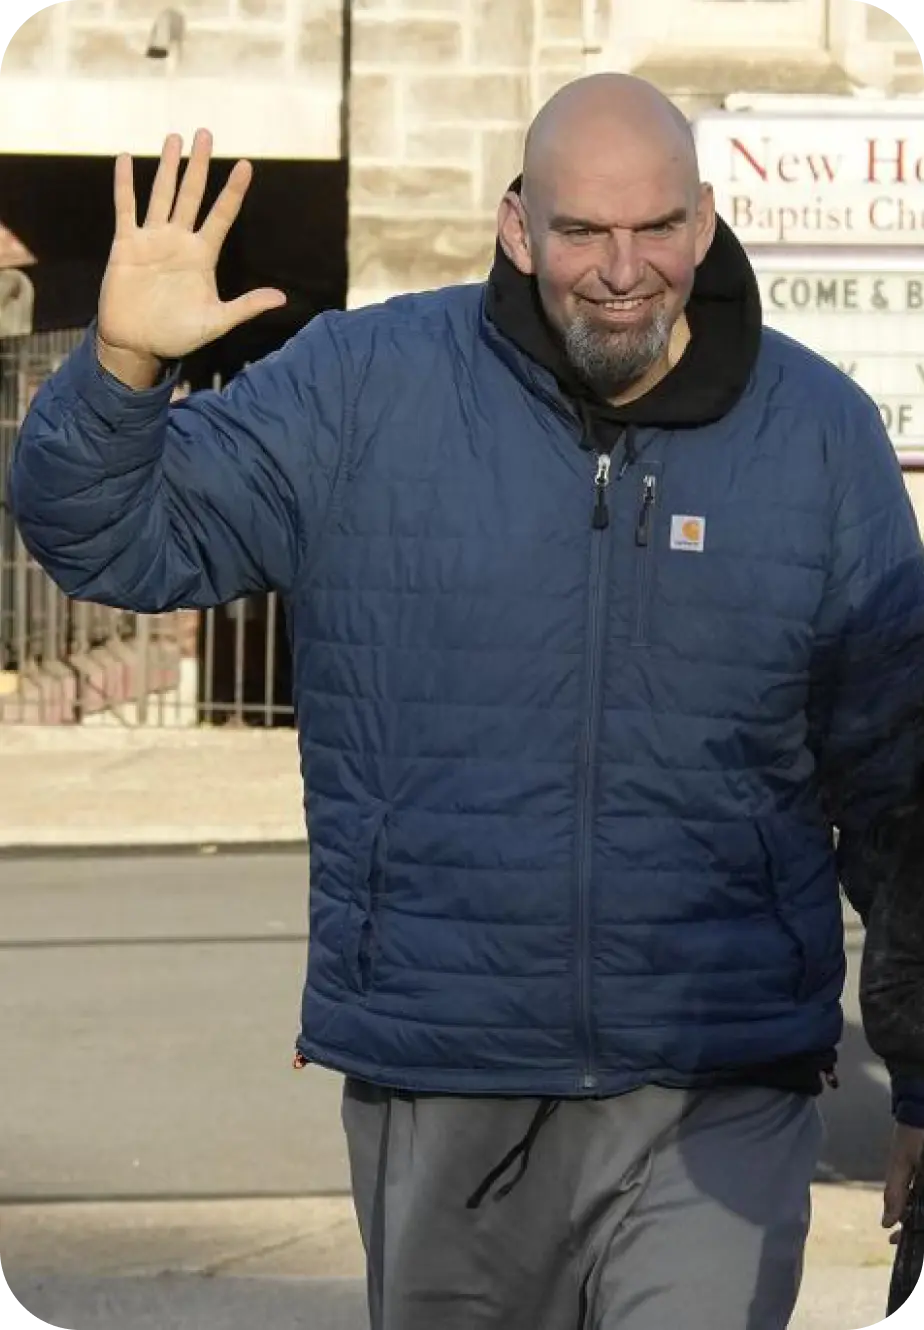 A bald man with a beard in a blue jacket has his right hand up waving.